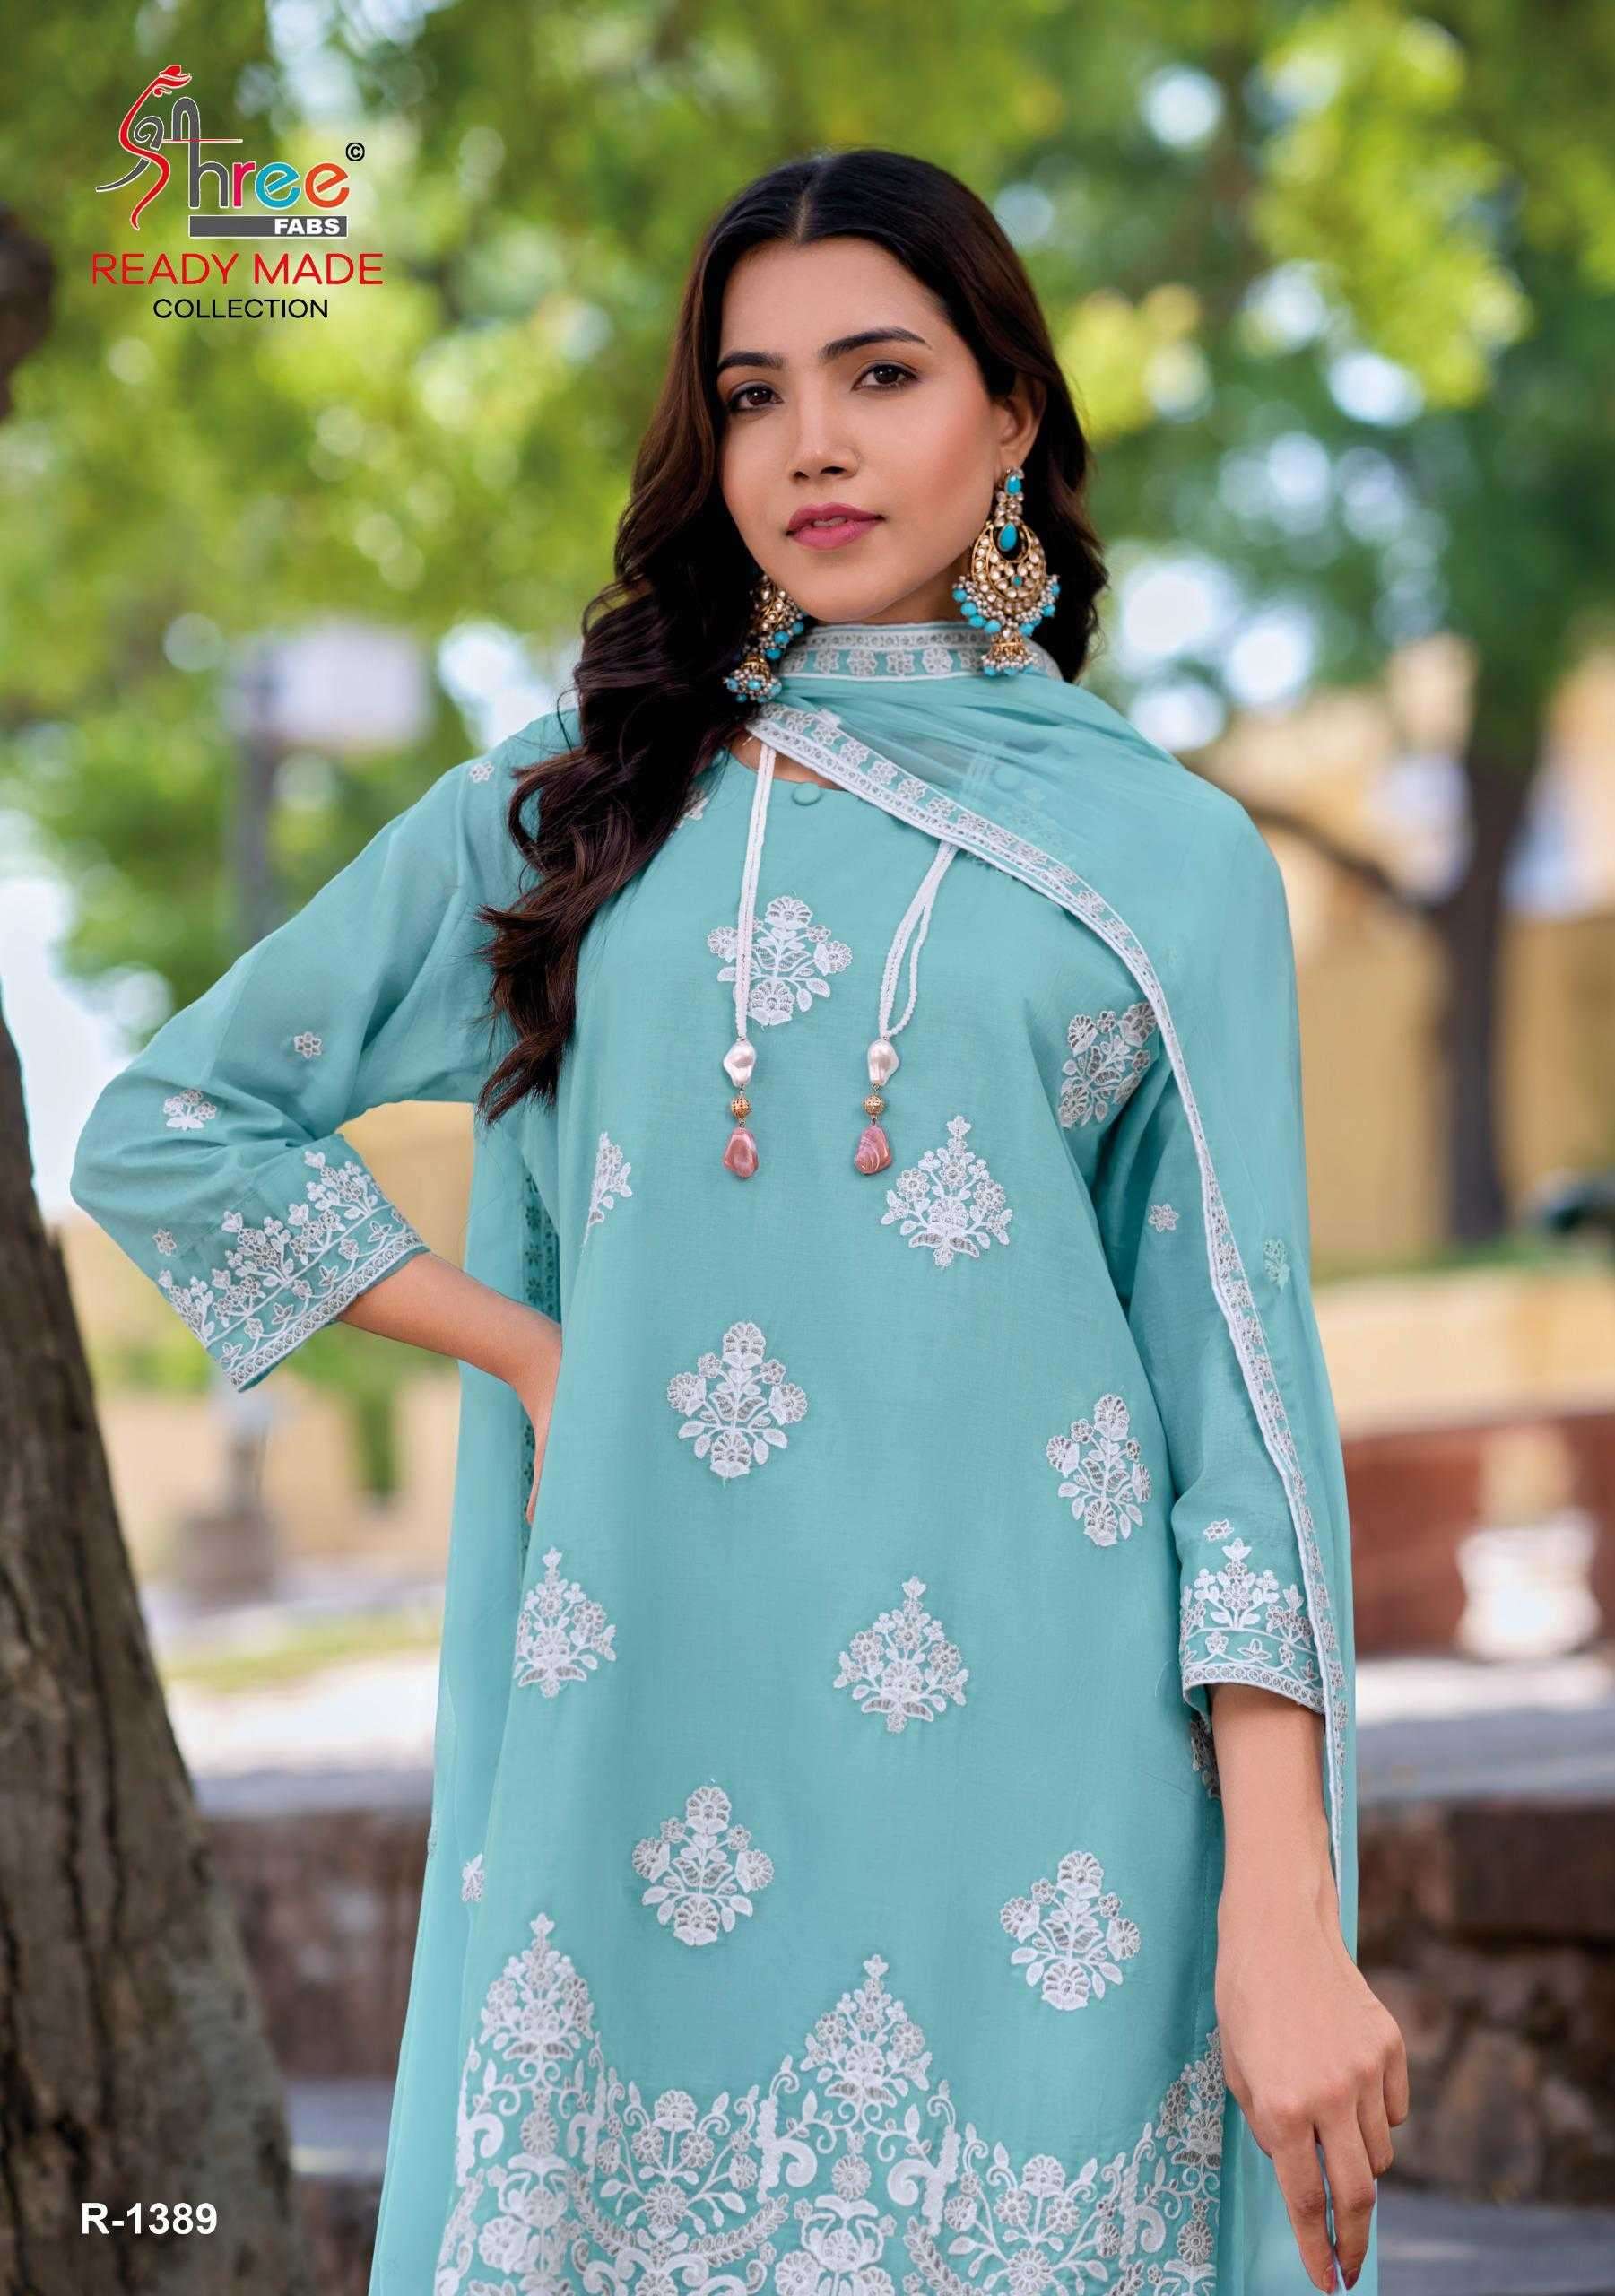 shree fab R-1389 cambric cottan lawn readymade suit 